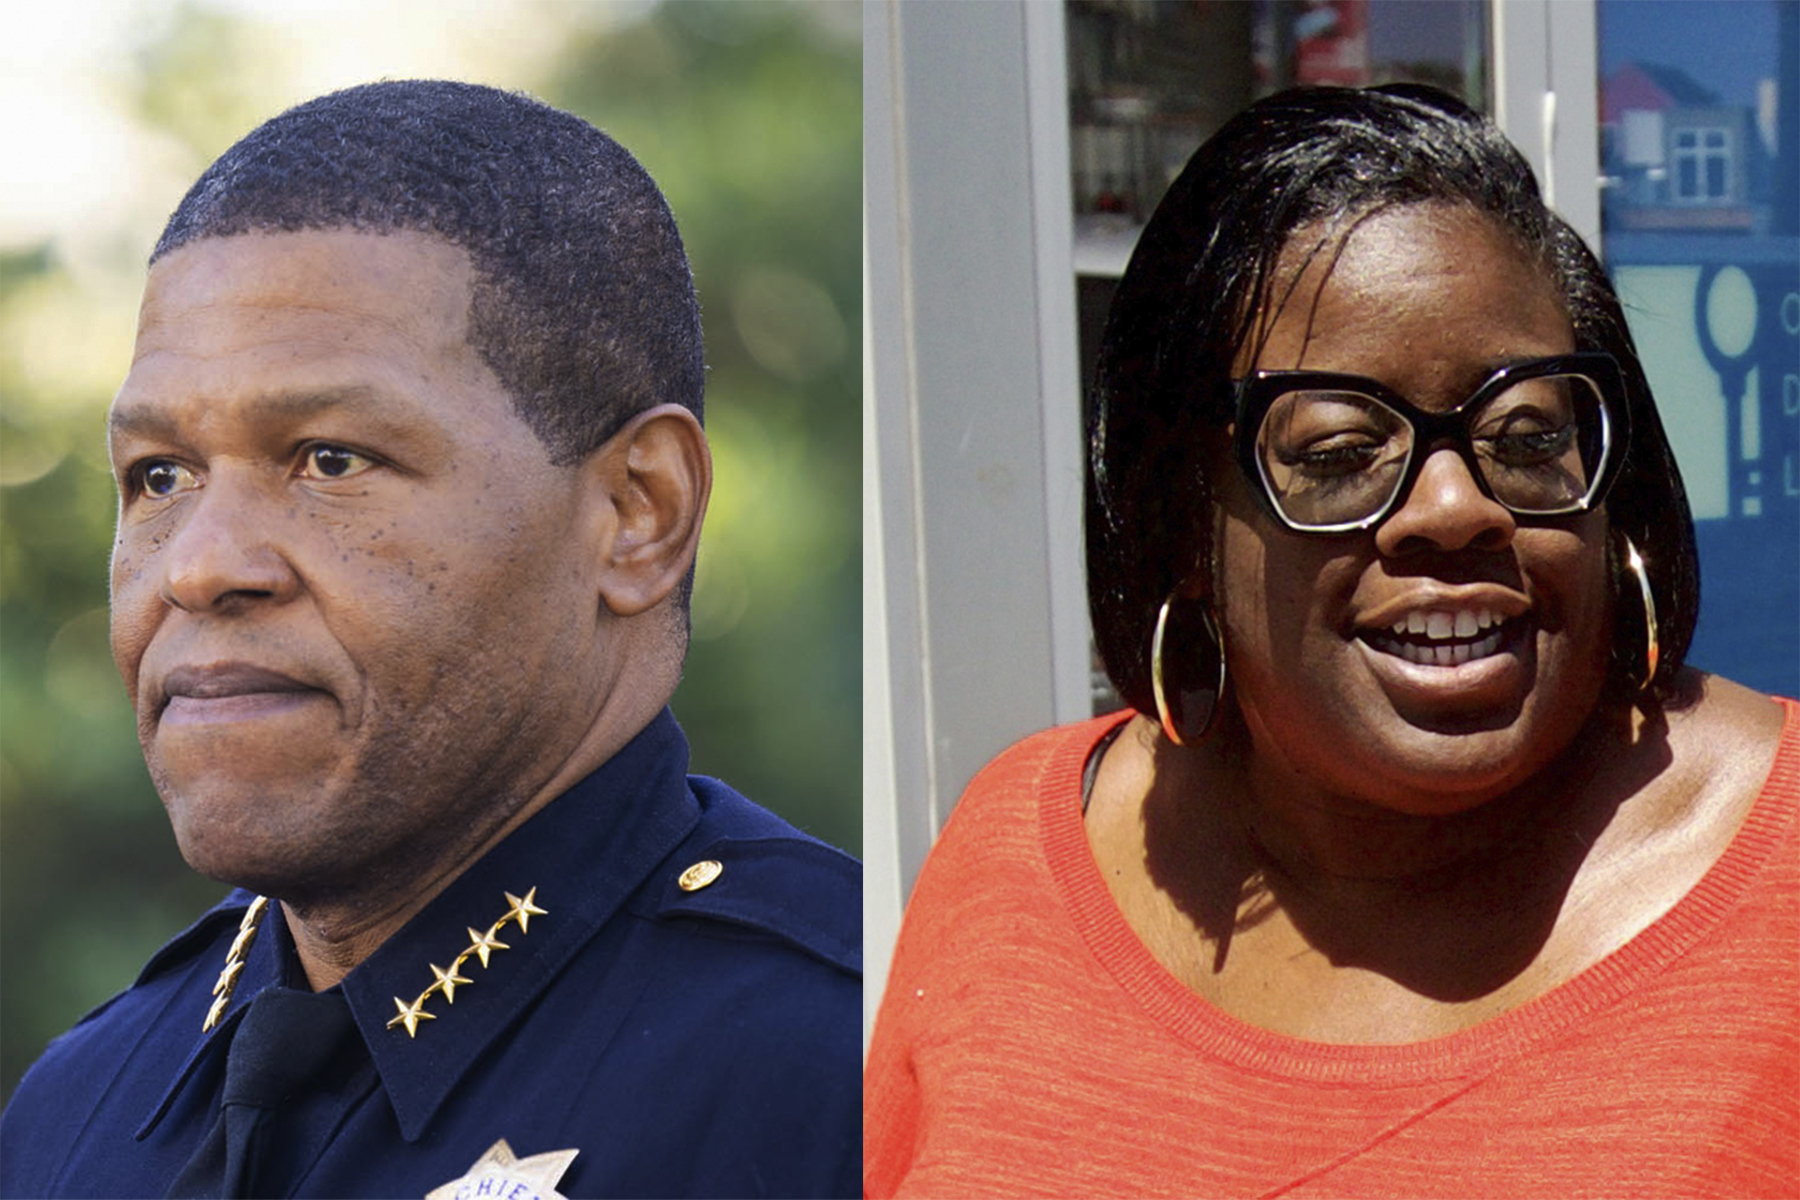 A split image, left side shows a man in a police uniform with stars on collar; right side, a woman in glasses, earrings, and an orange top.